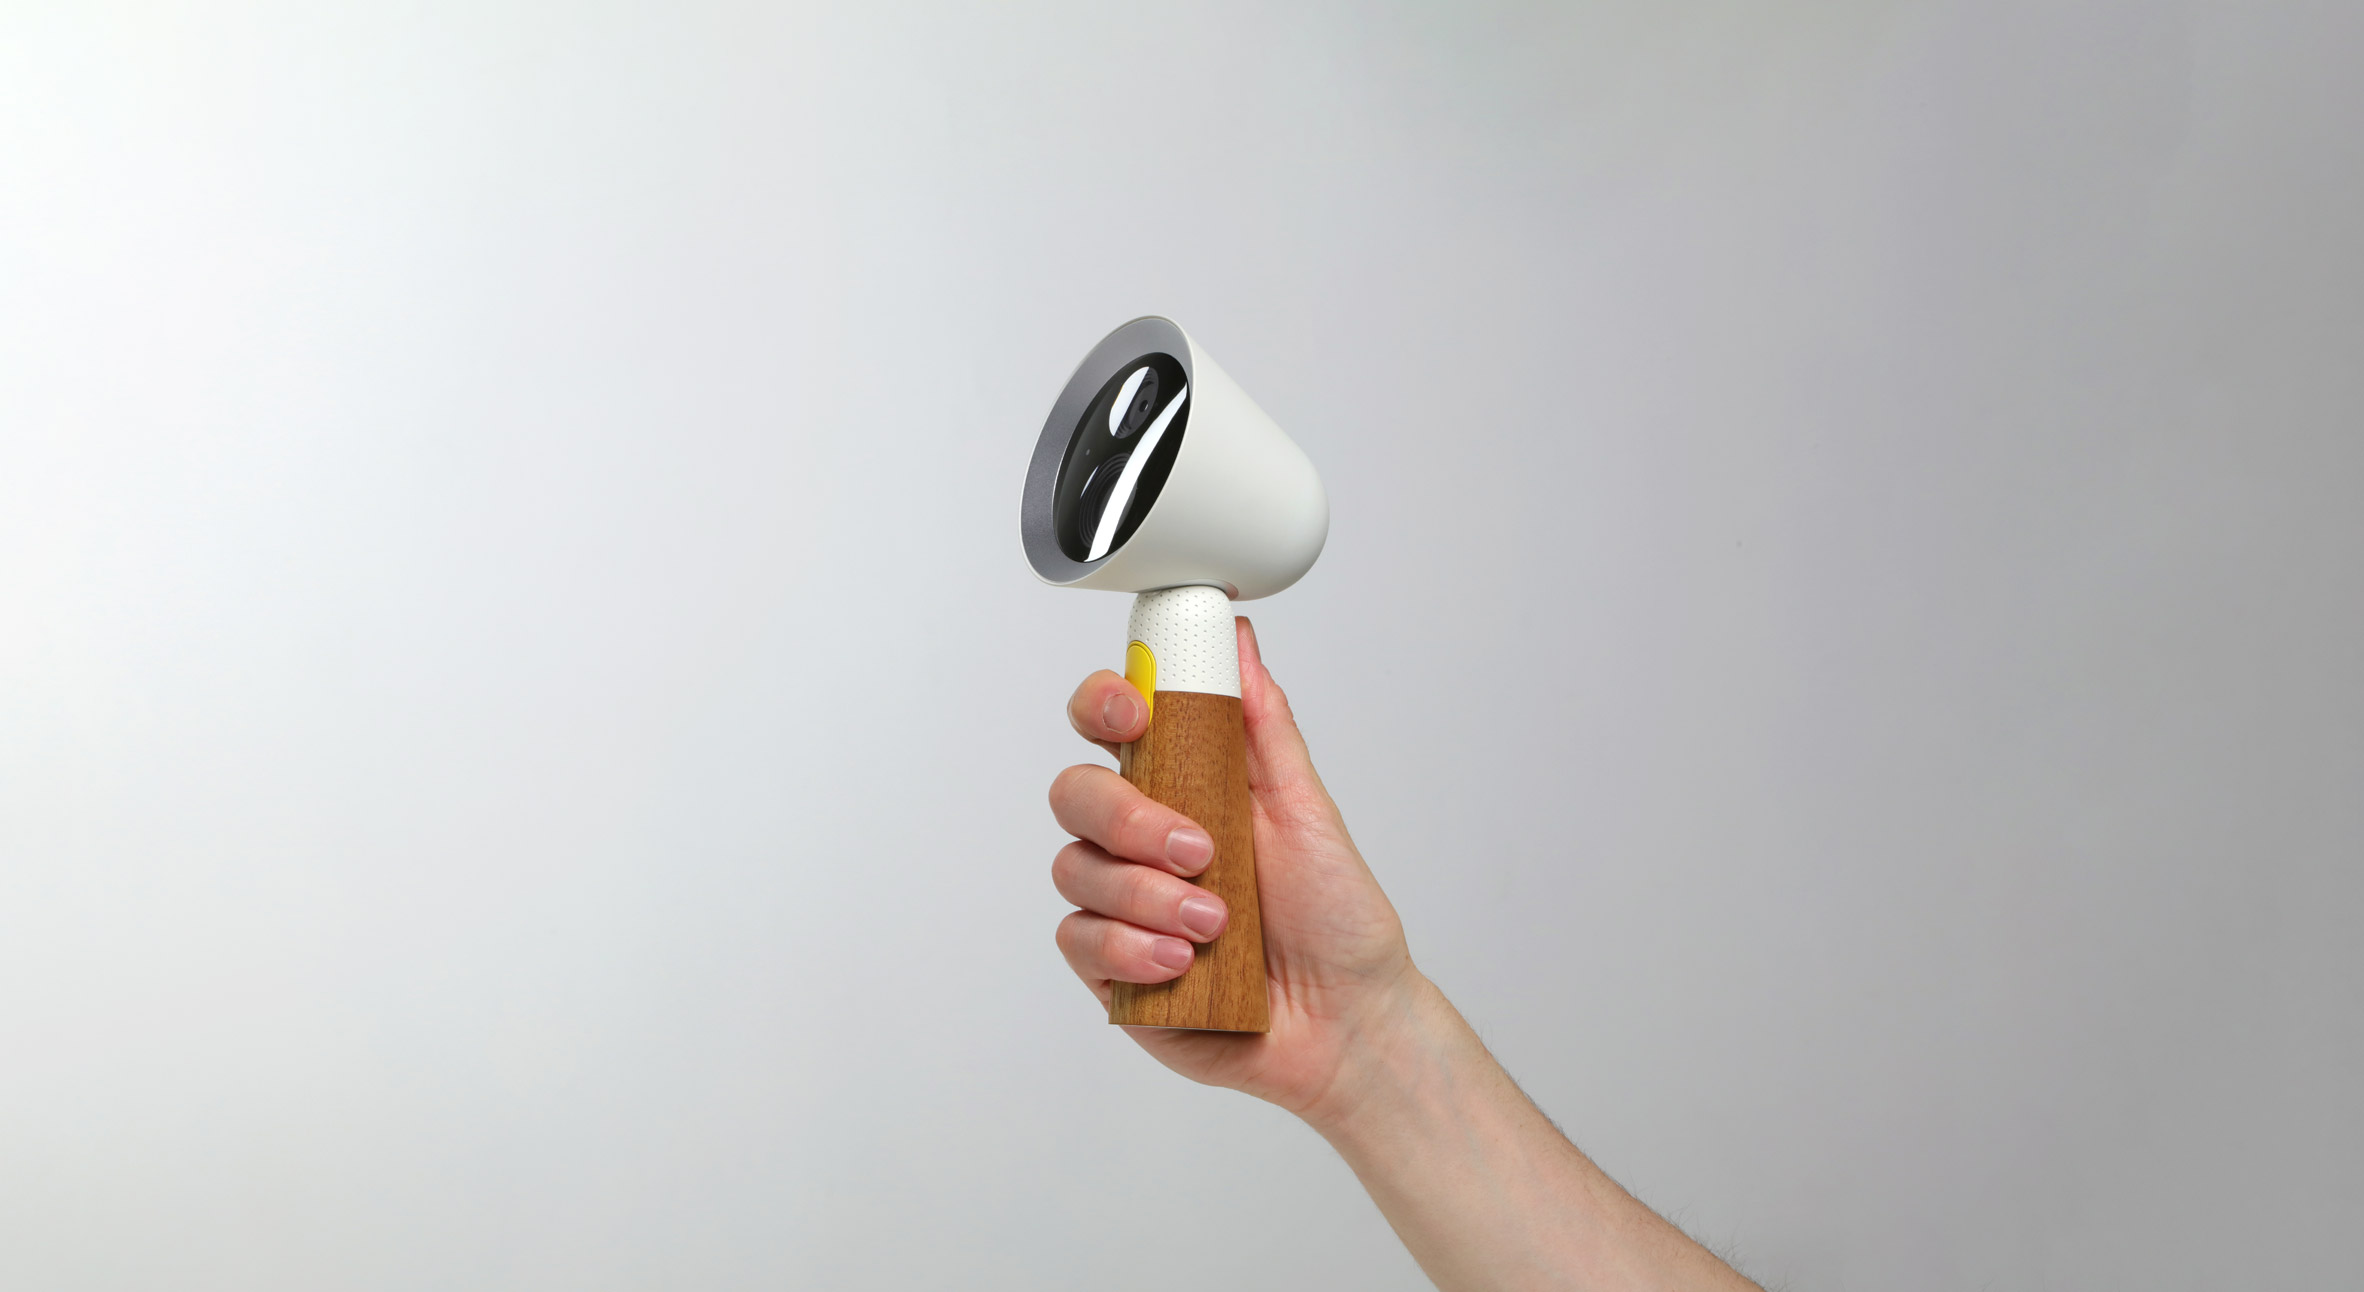 Spot toy by New Deal Design